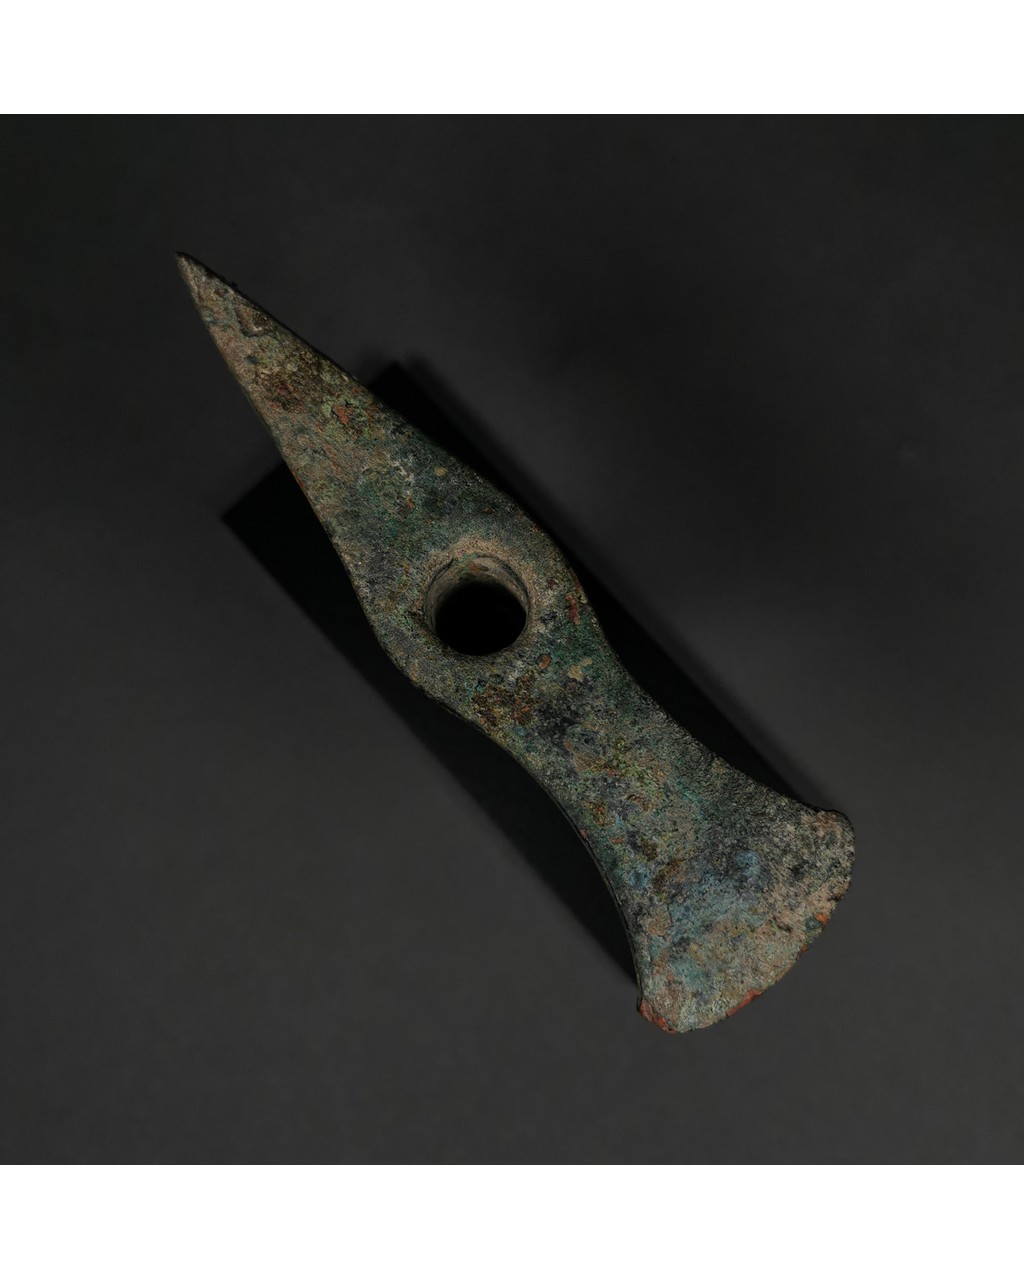 HEAVY BRONZE AGE BATTLE AXE ON STAND - Image 5 of 5